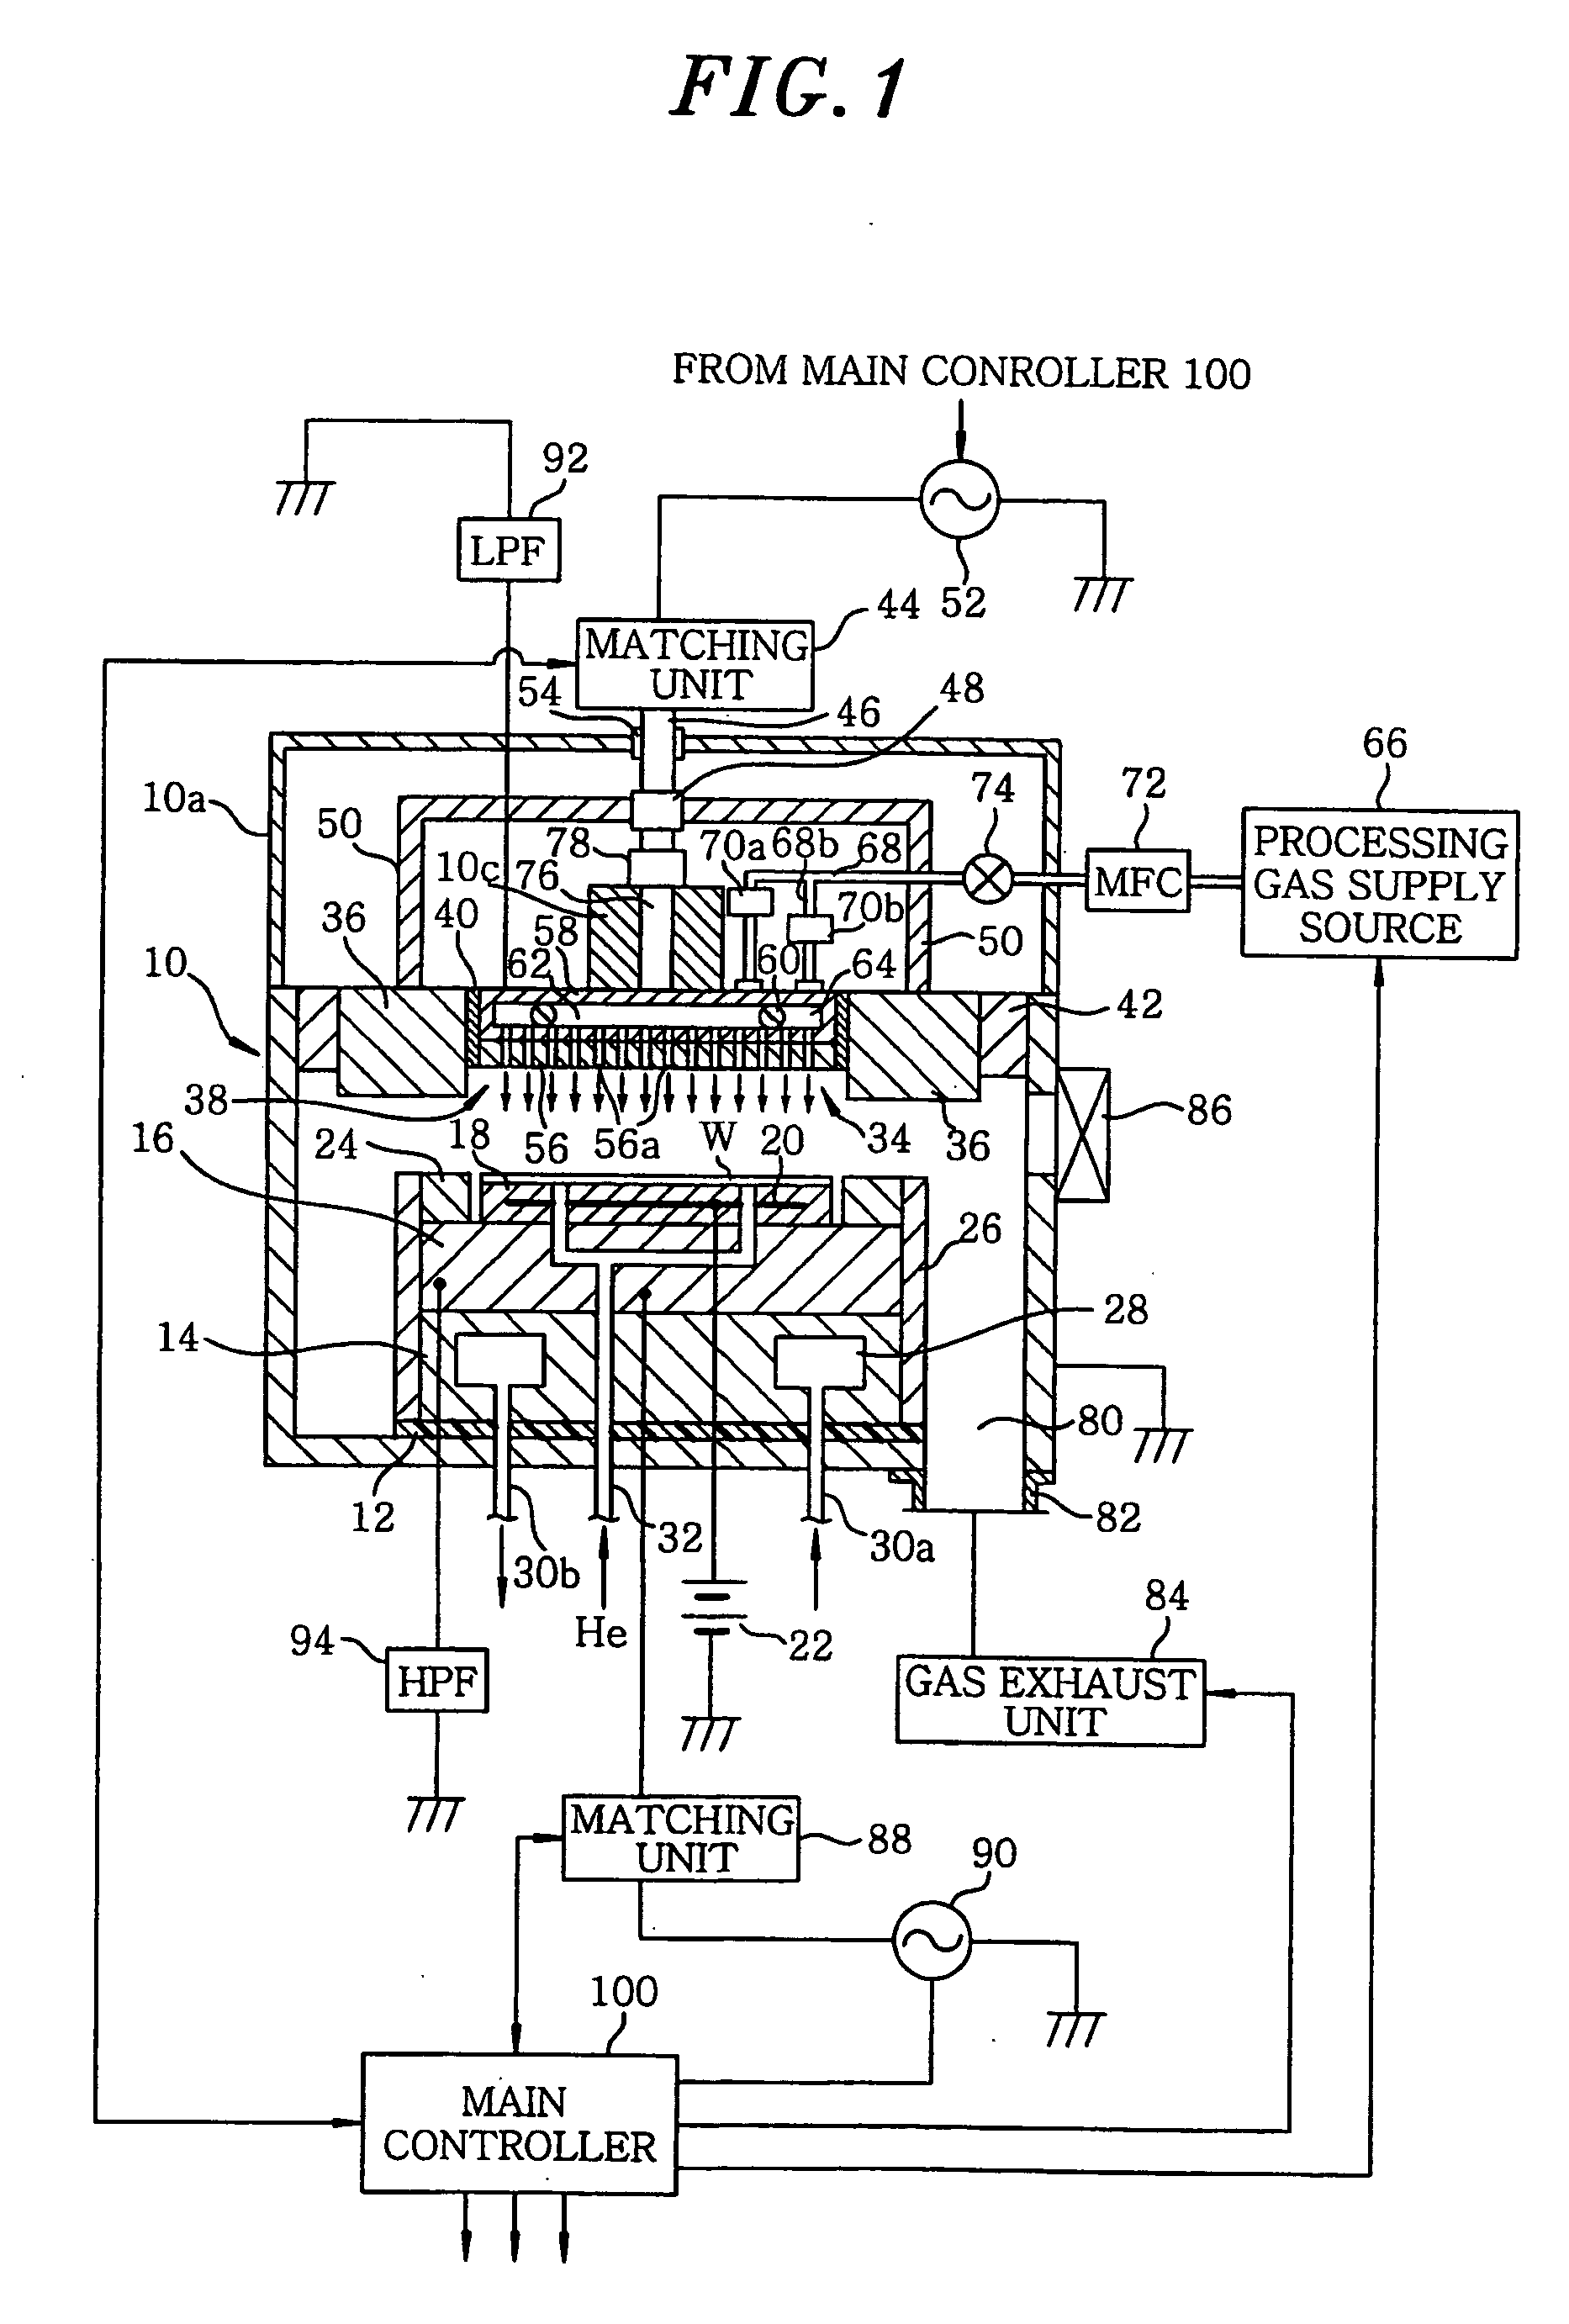 Plasma processing method and apparatus, and autorunning program for variable matching unit